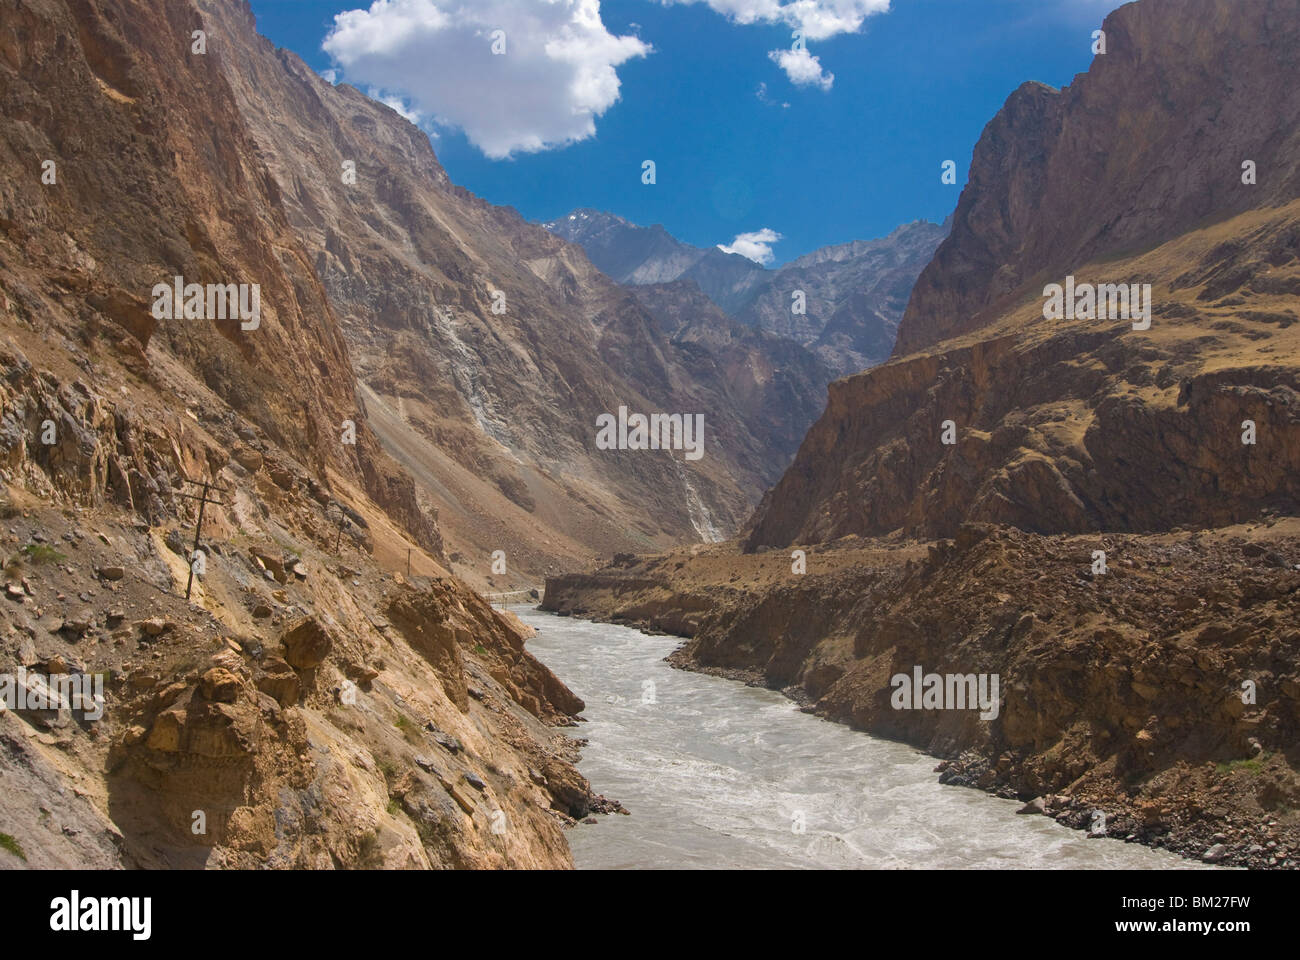 Mountainous landscape on the road between Dushanbe and the Bartang Valley, Tajikistan, Central Asia Stock Photo